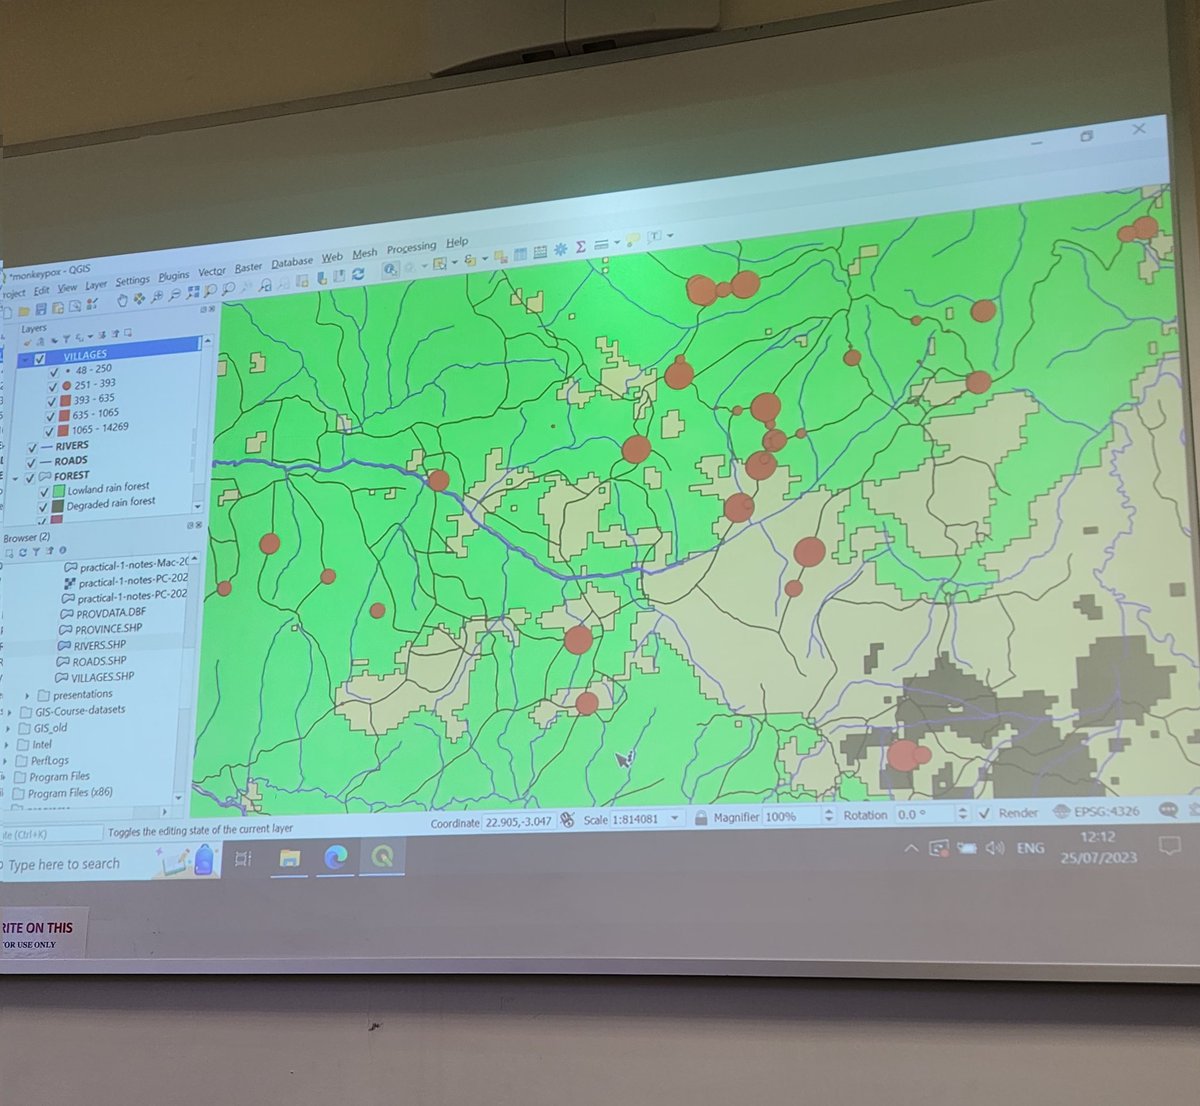 Just knew an open-source and free-to-use GIS tool, @qgis today 🤦‍♂️ As my ArcGIS license ending, QGIS offers a robust for spatial analysis and epid work. 

It also has its own #Python (PyQGIS) console as well.

Ongoing QGIS course using monkeypox dataset at @LSHTM